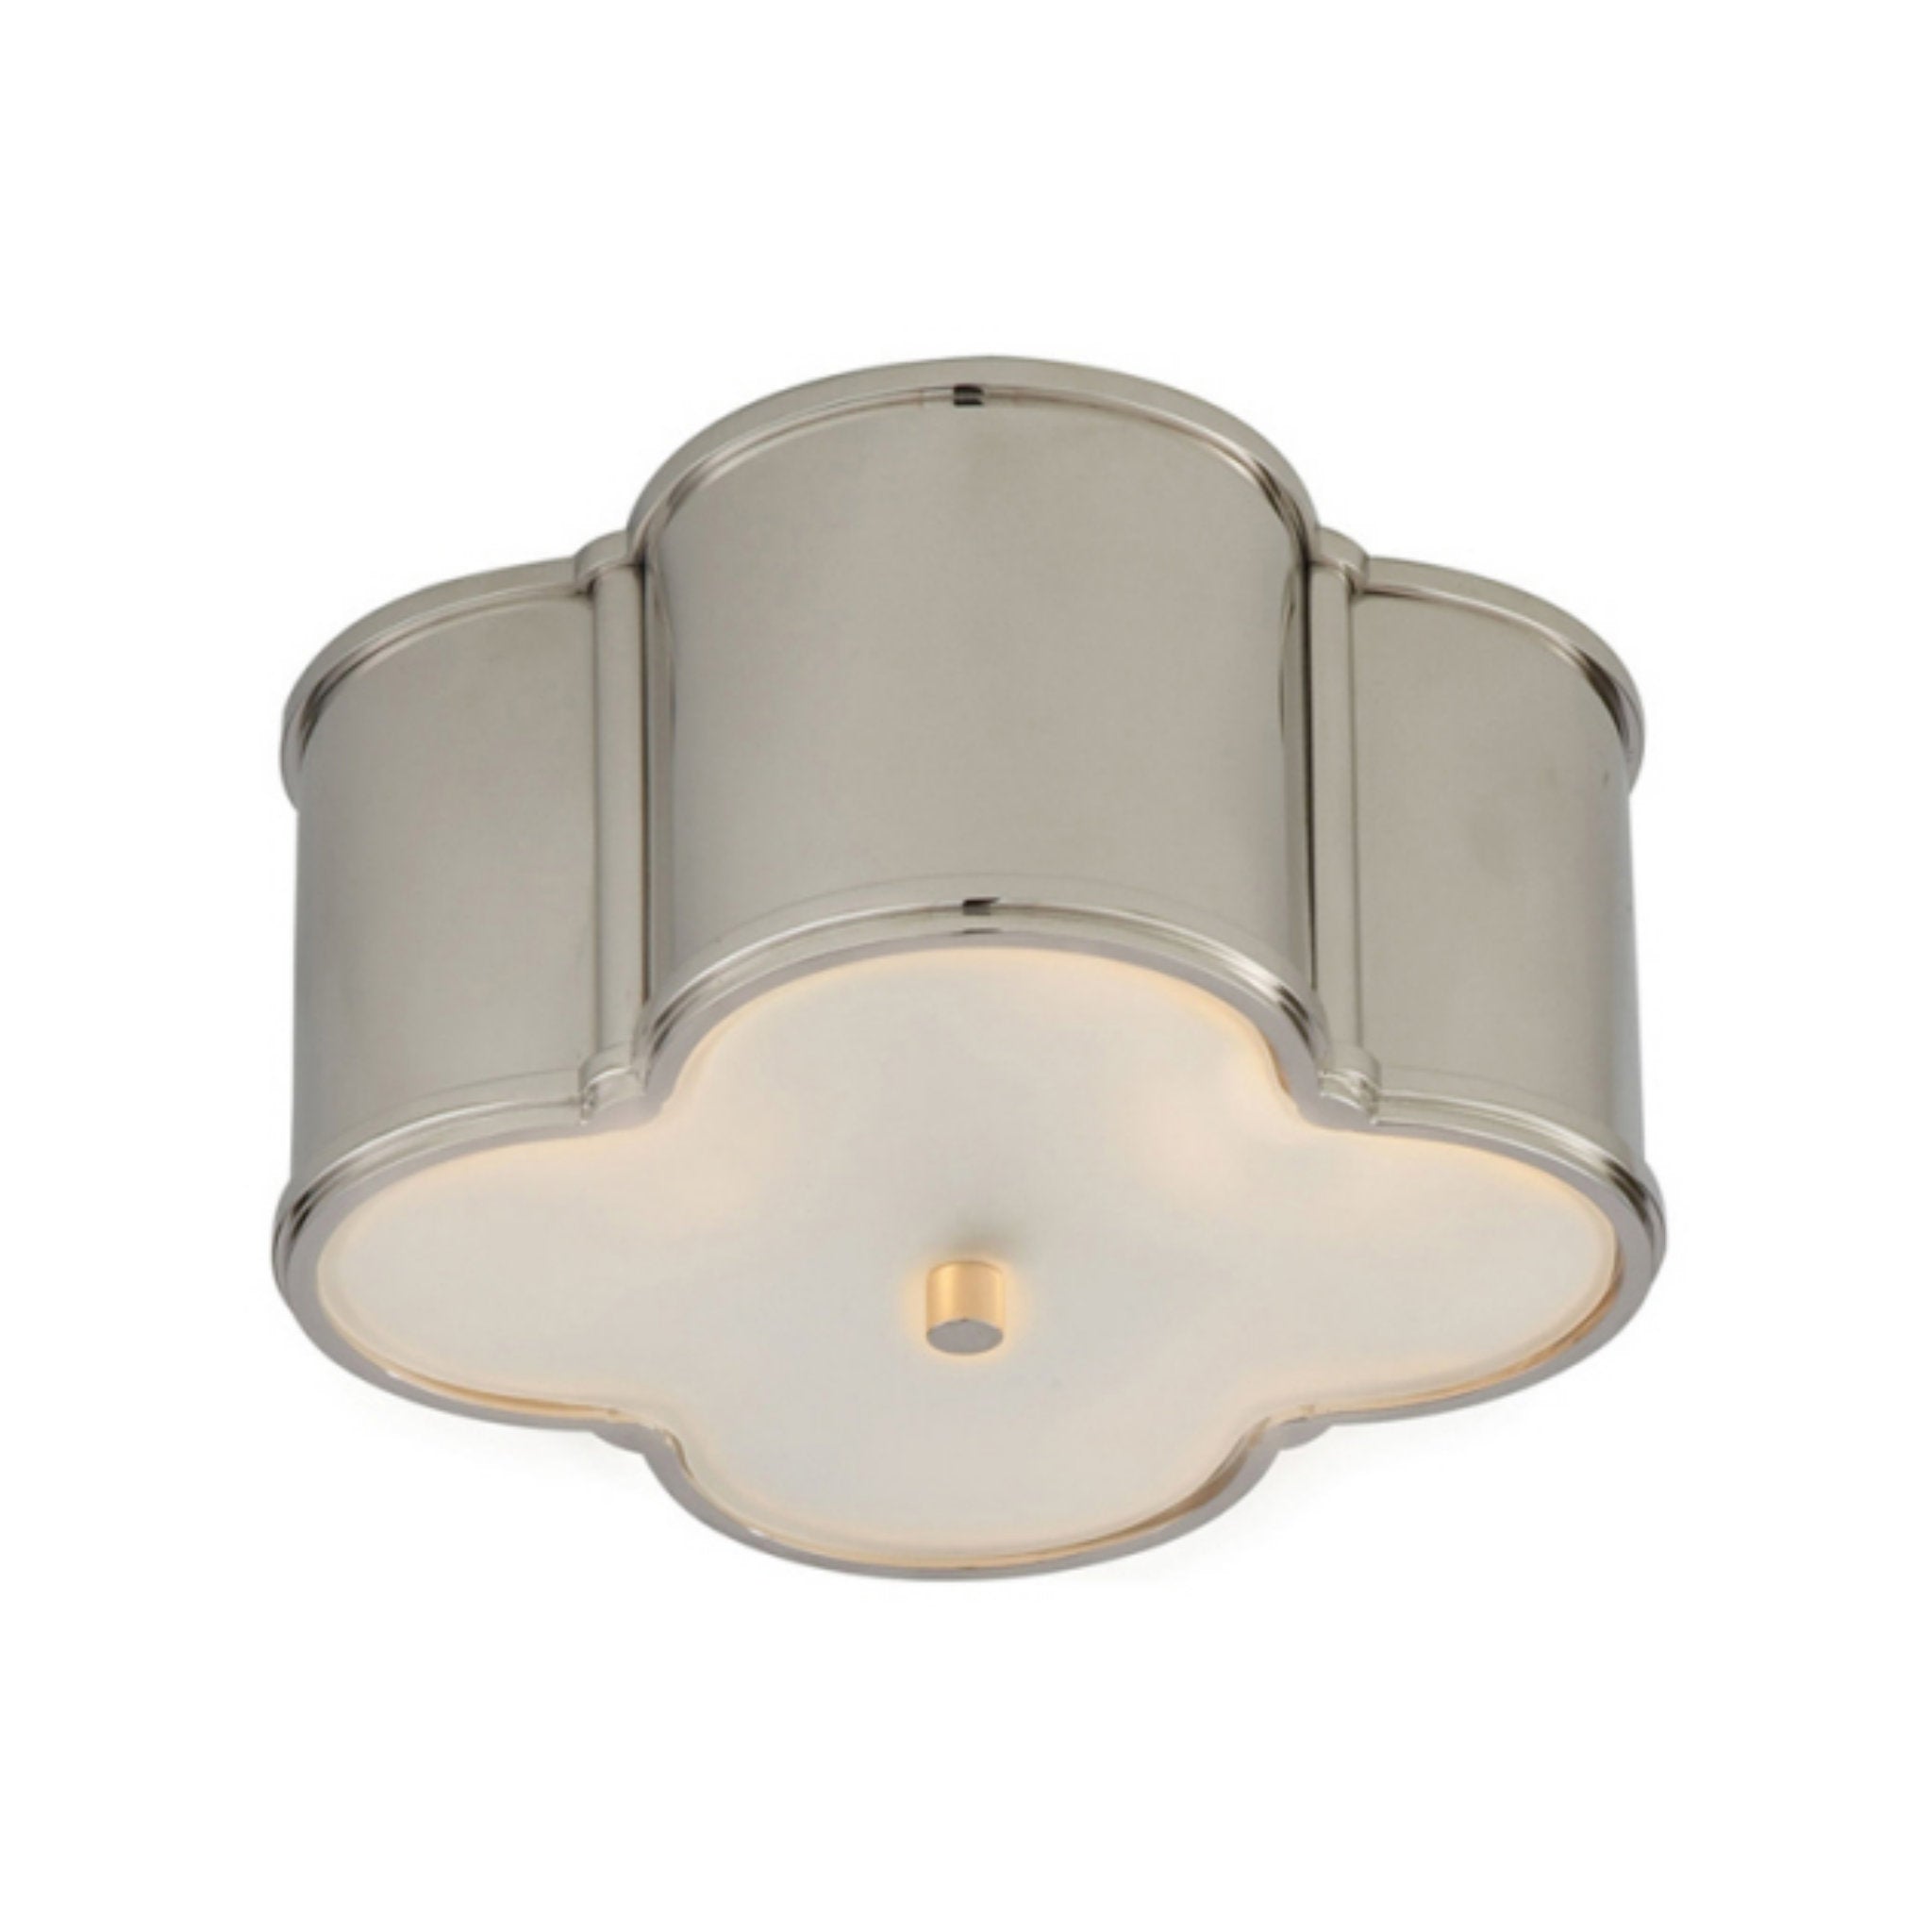 Alexa Hampton Basil Small Flush Mount in Polished Nickel with Frosted Glass